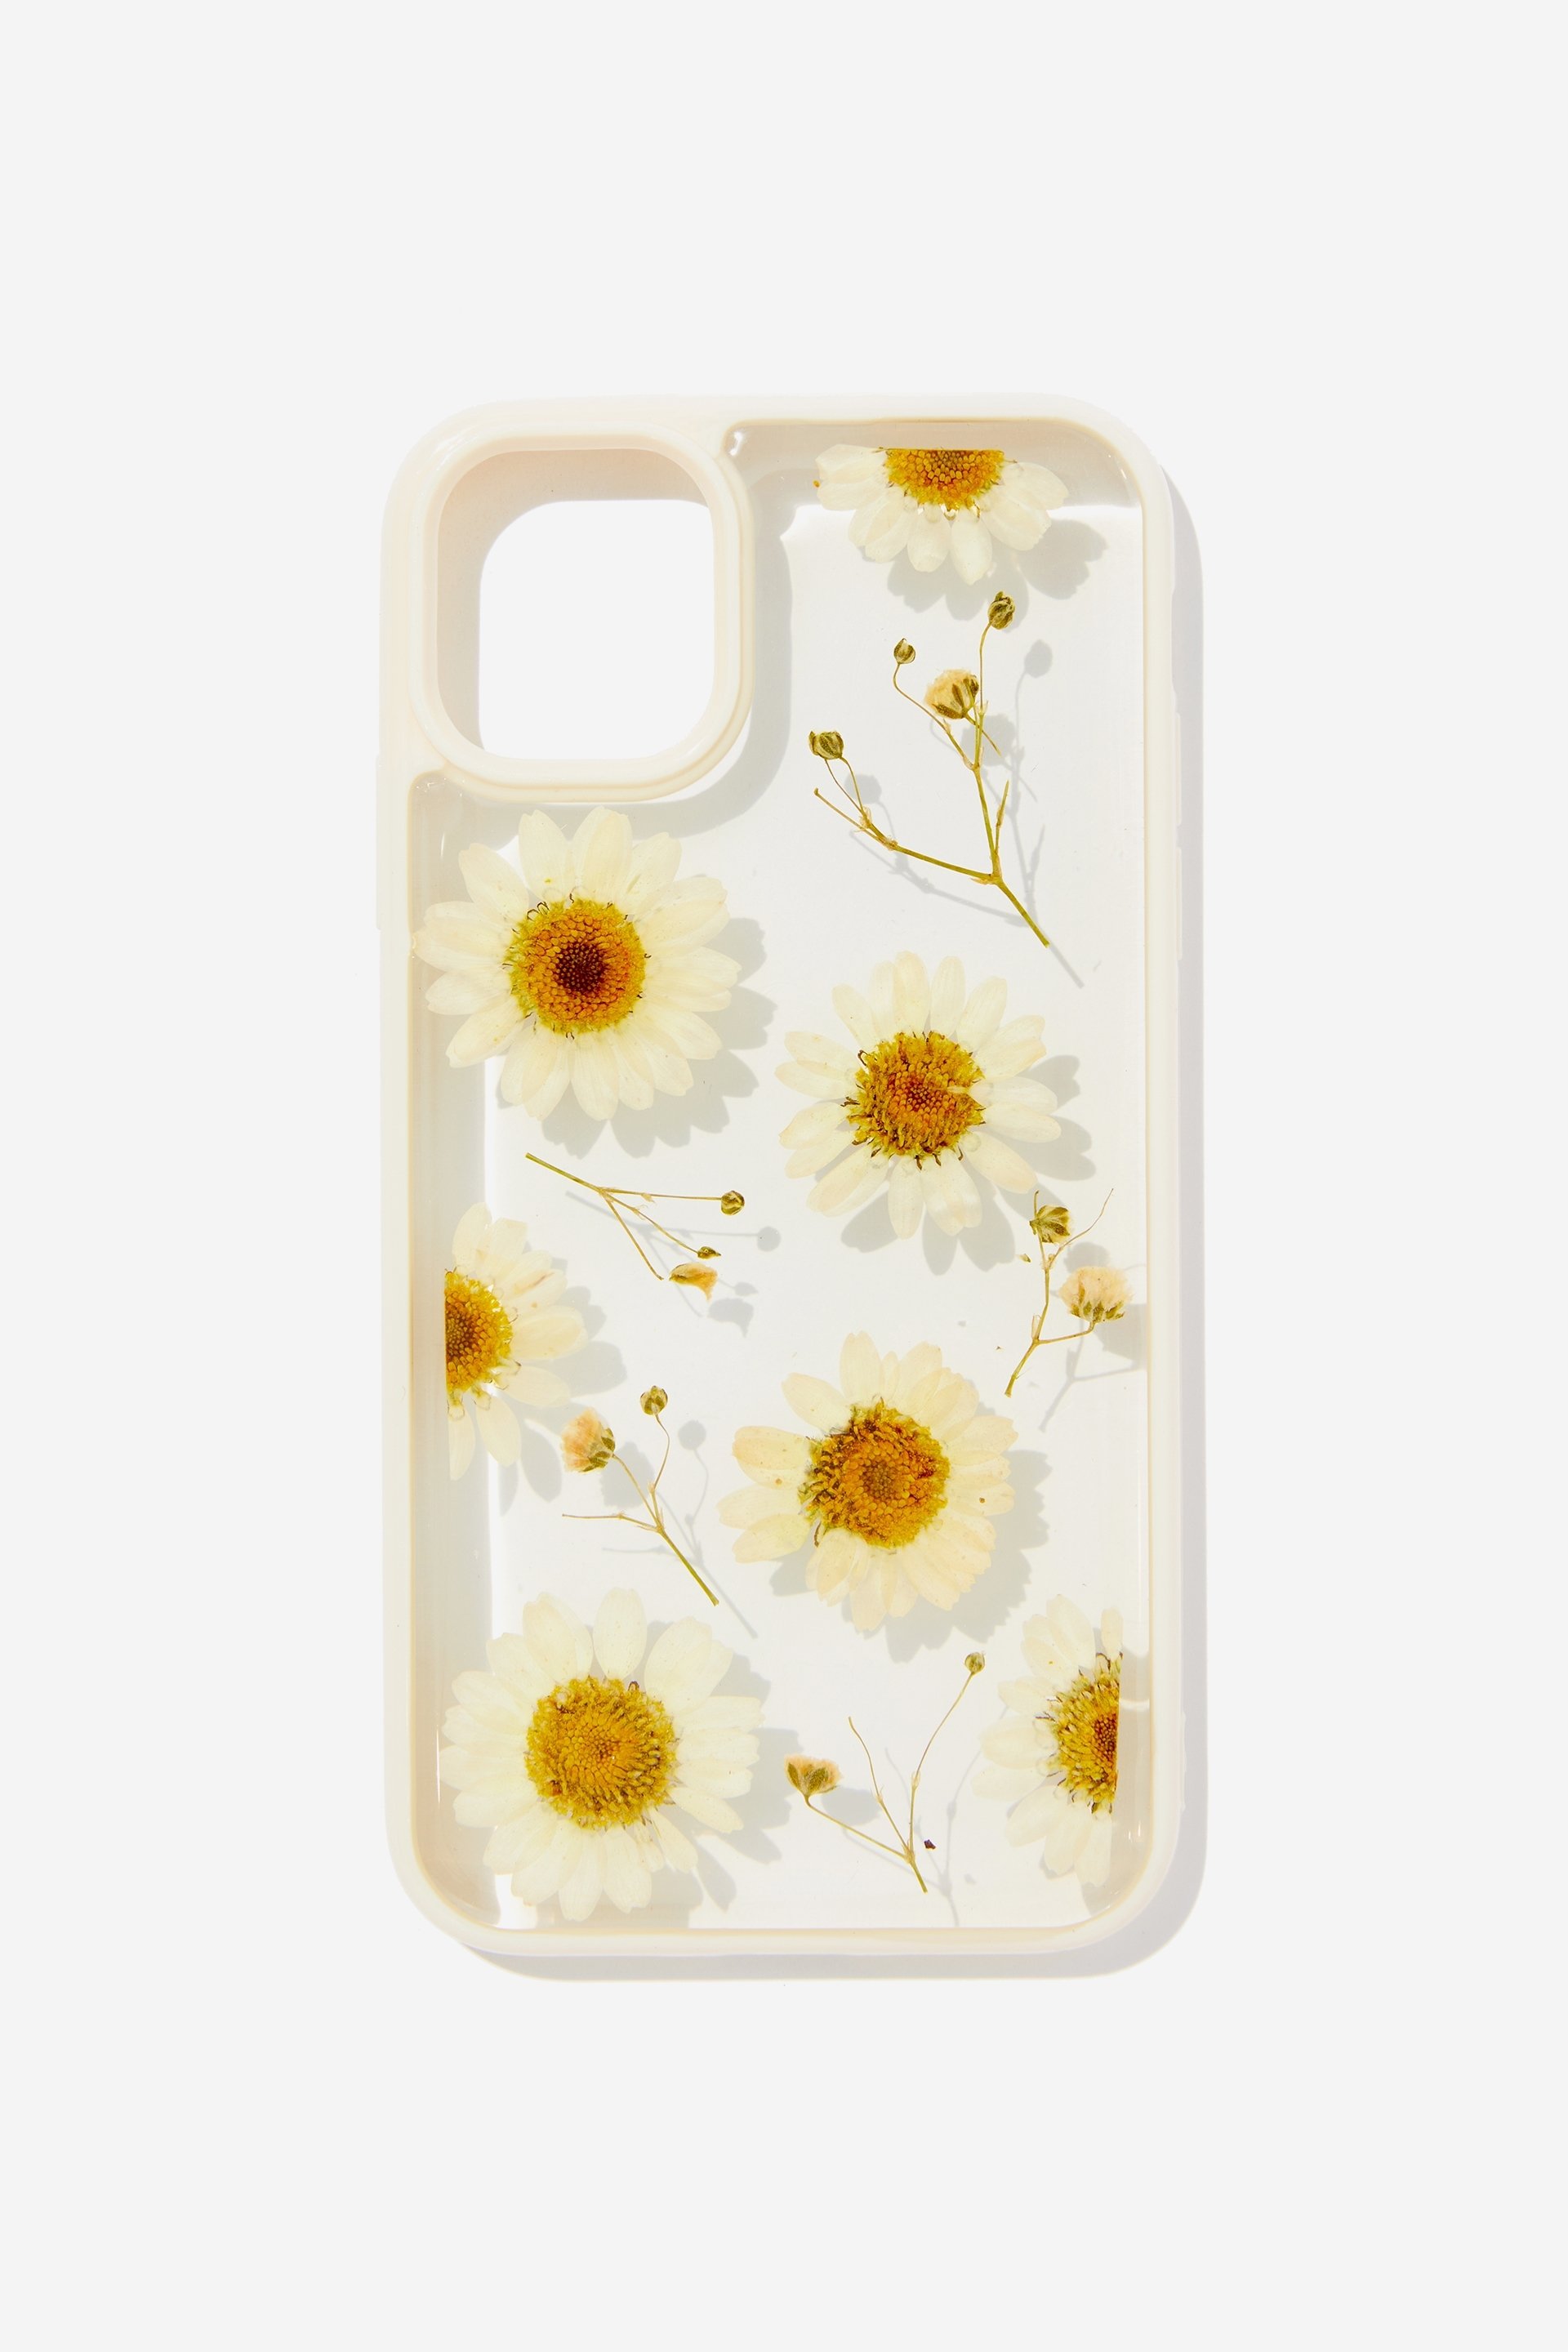 Typo - Protective Phone Case iPhone 11 - Trapped daisy / ecru